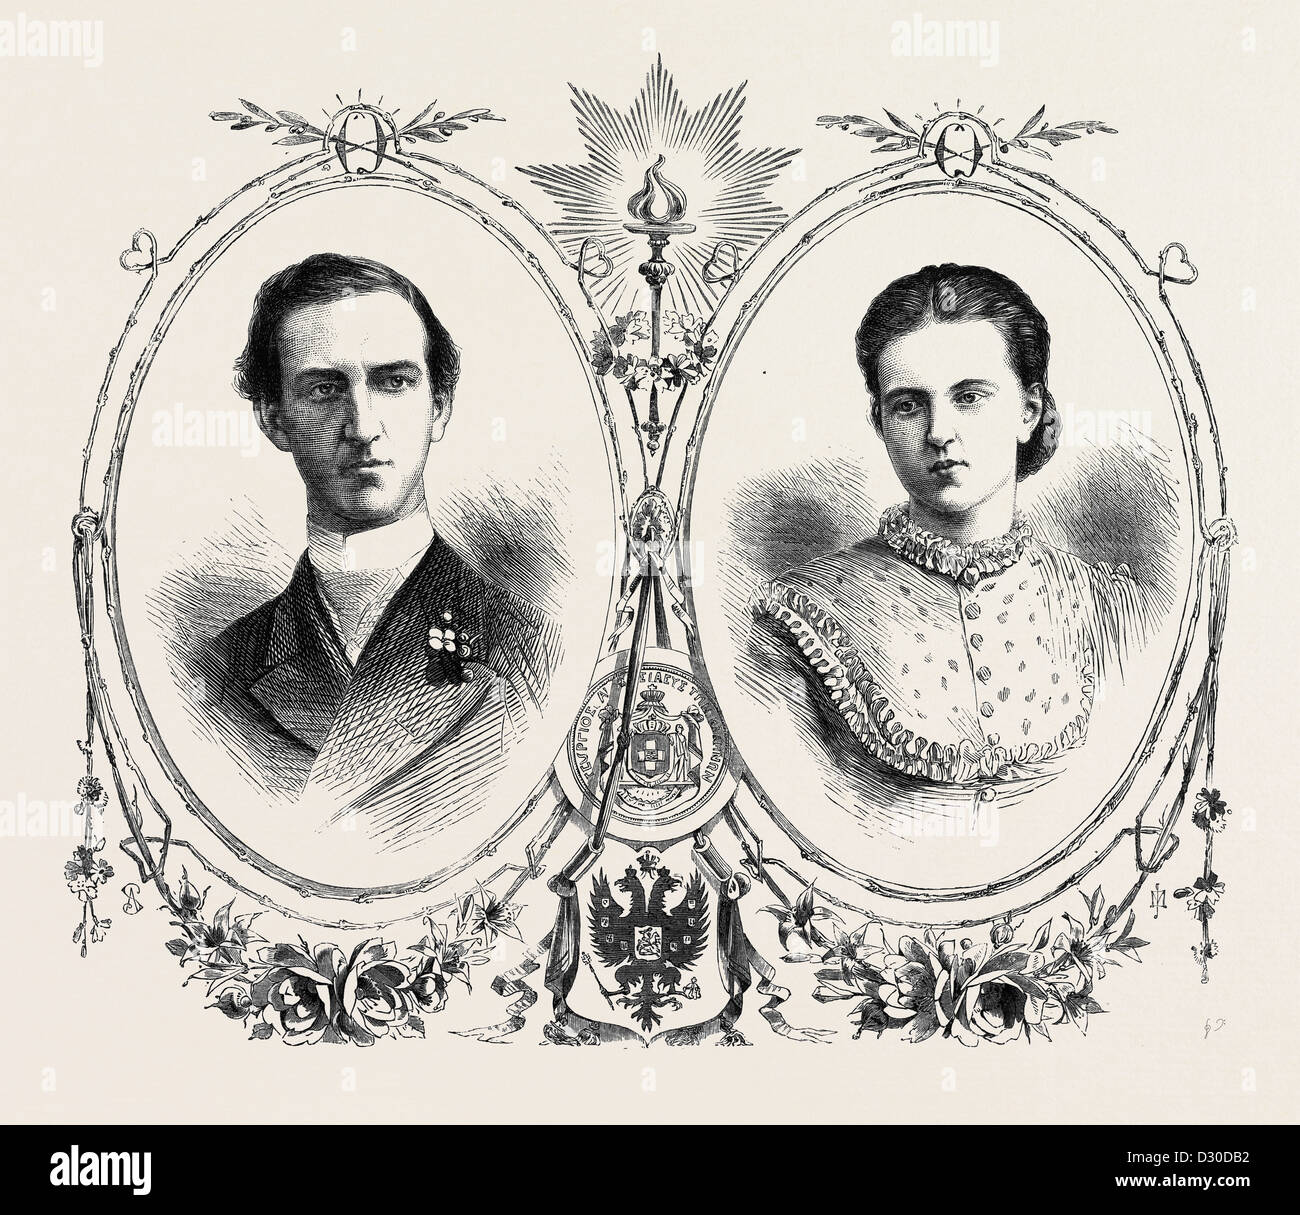 GEORGE I. KING OF GREECE AND HIS QUEEN THE GRAND DUCHESS OLGA CONSTANTINOVNA OF RUSSIA 1867 Stock Photo